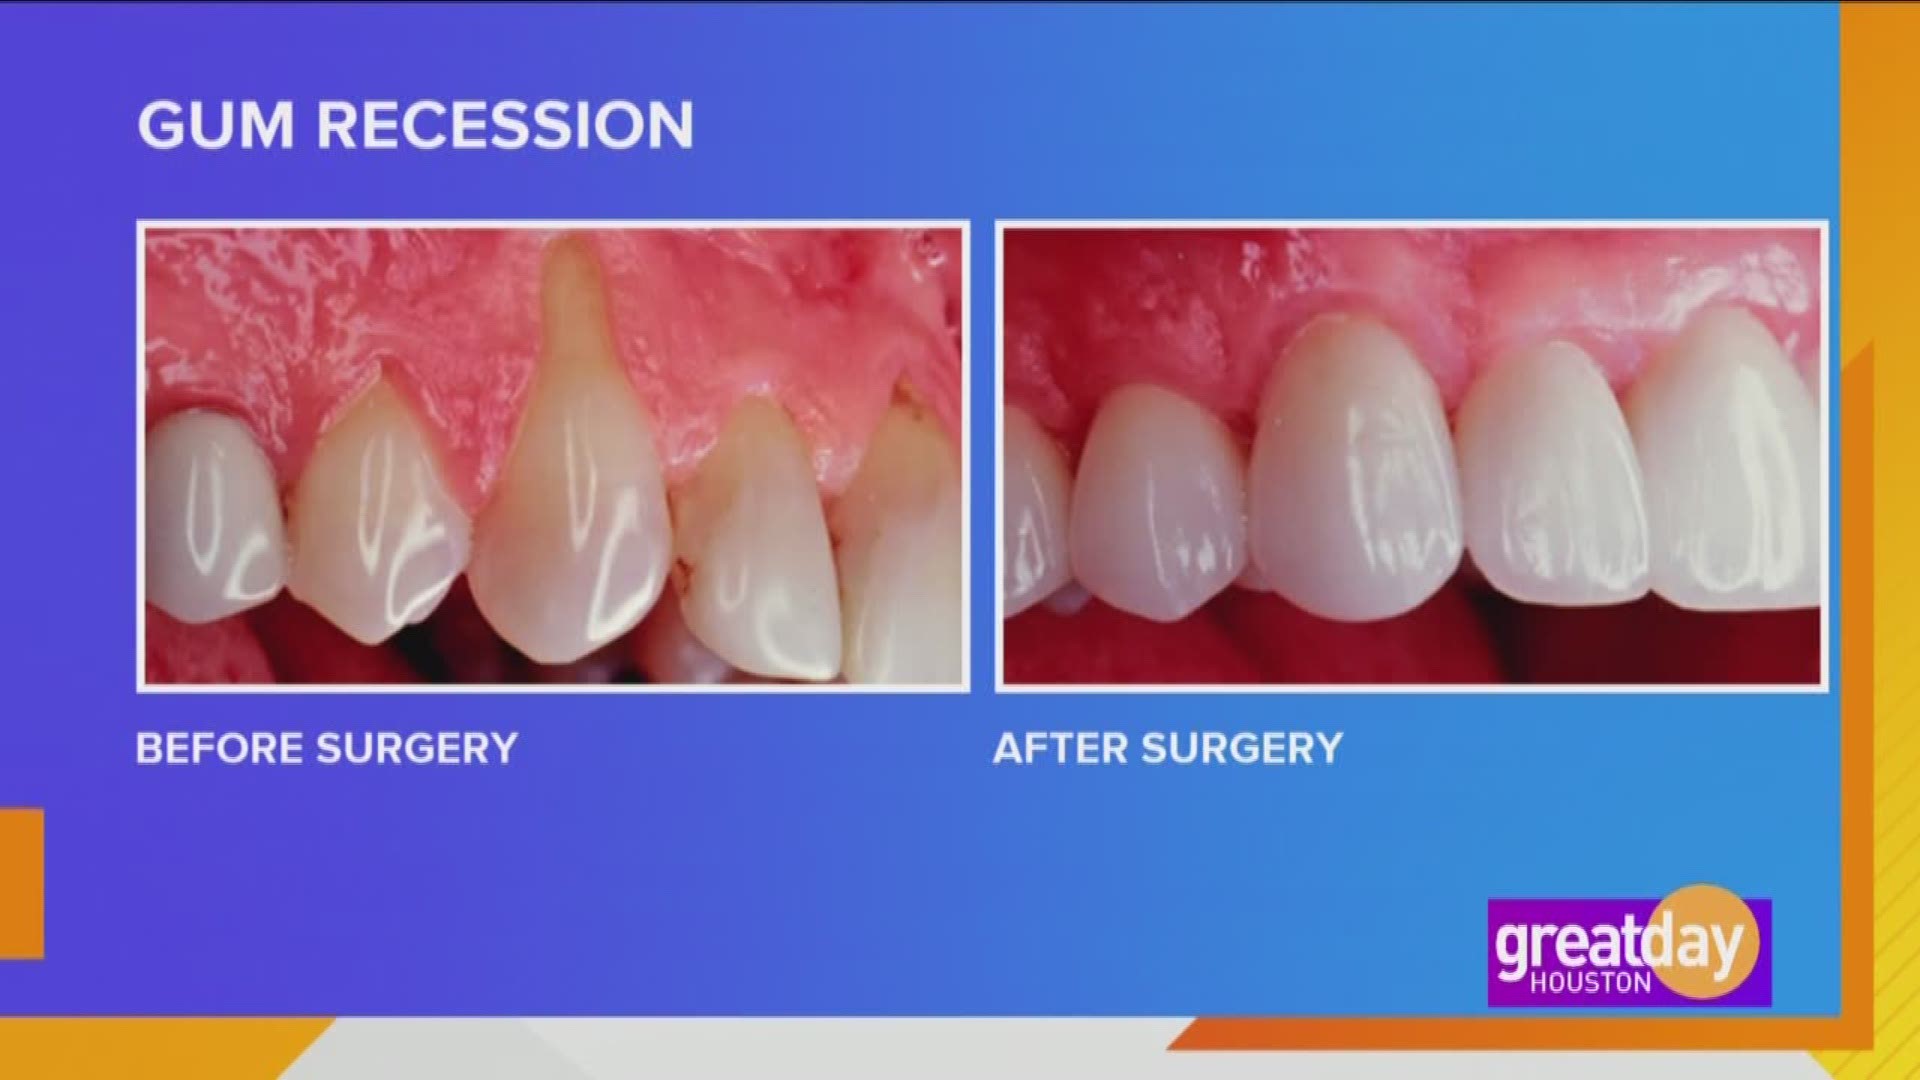 What causes gum recession? How can you stop it? Dr. Anna Munné has the answers.